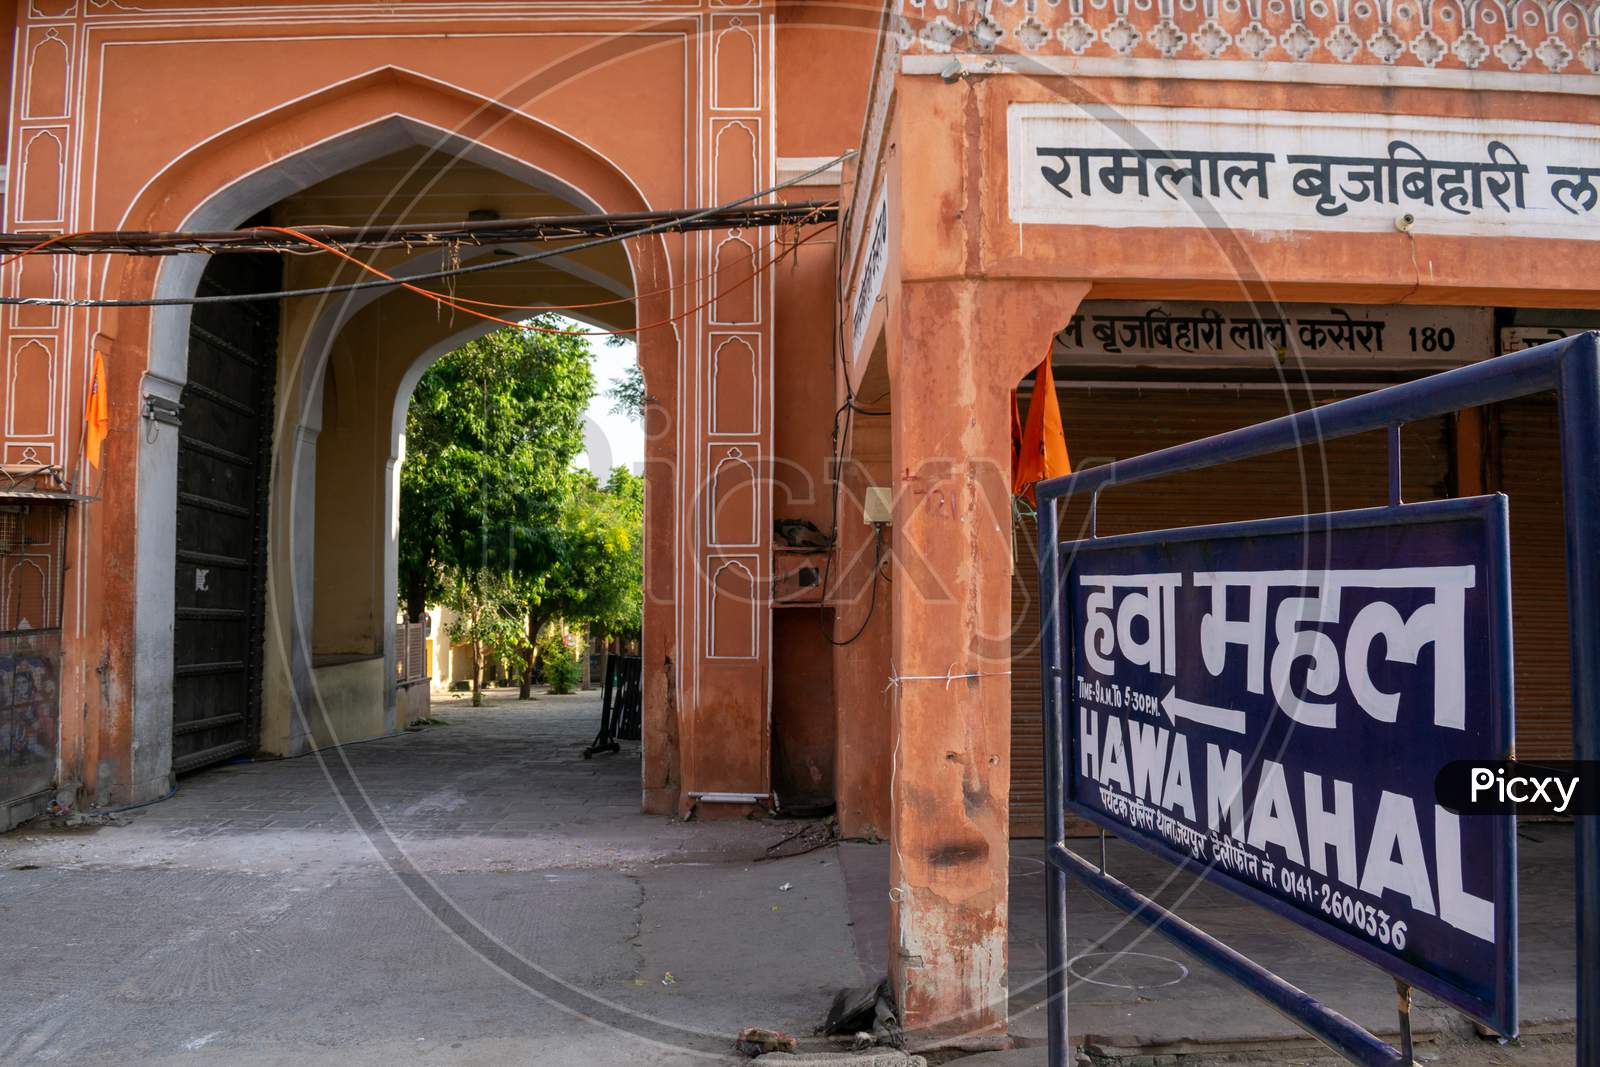 Entrance Gate and Direction sign board for Hawa Mahal Jaipur